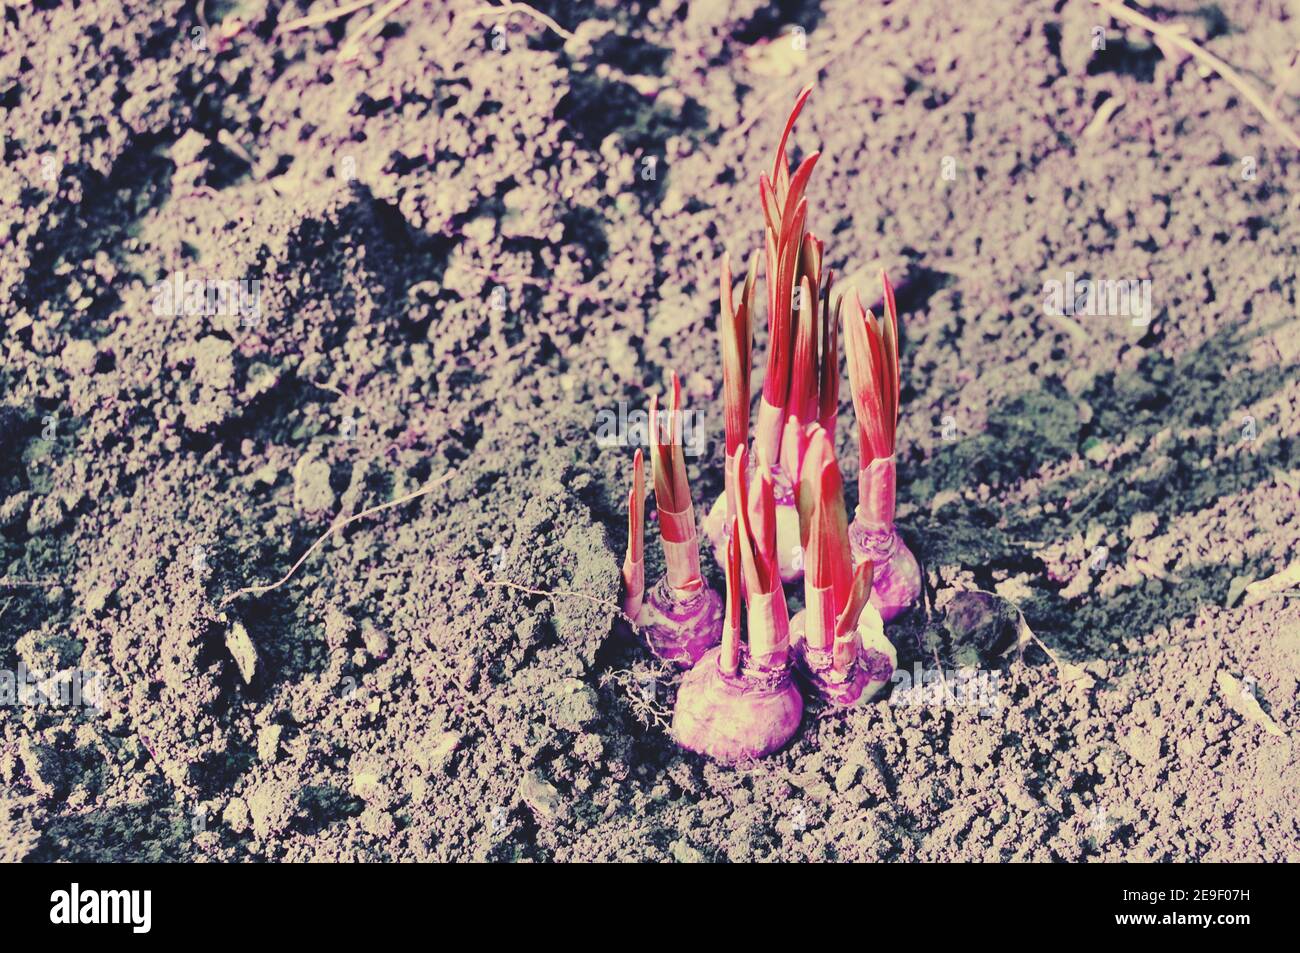 Daffodil (Narcissus) flower plant bulbs with roots, preparing to be planted into garden soil. Copy space text, pink filter applied Stock Photo